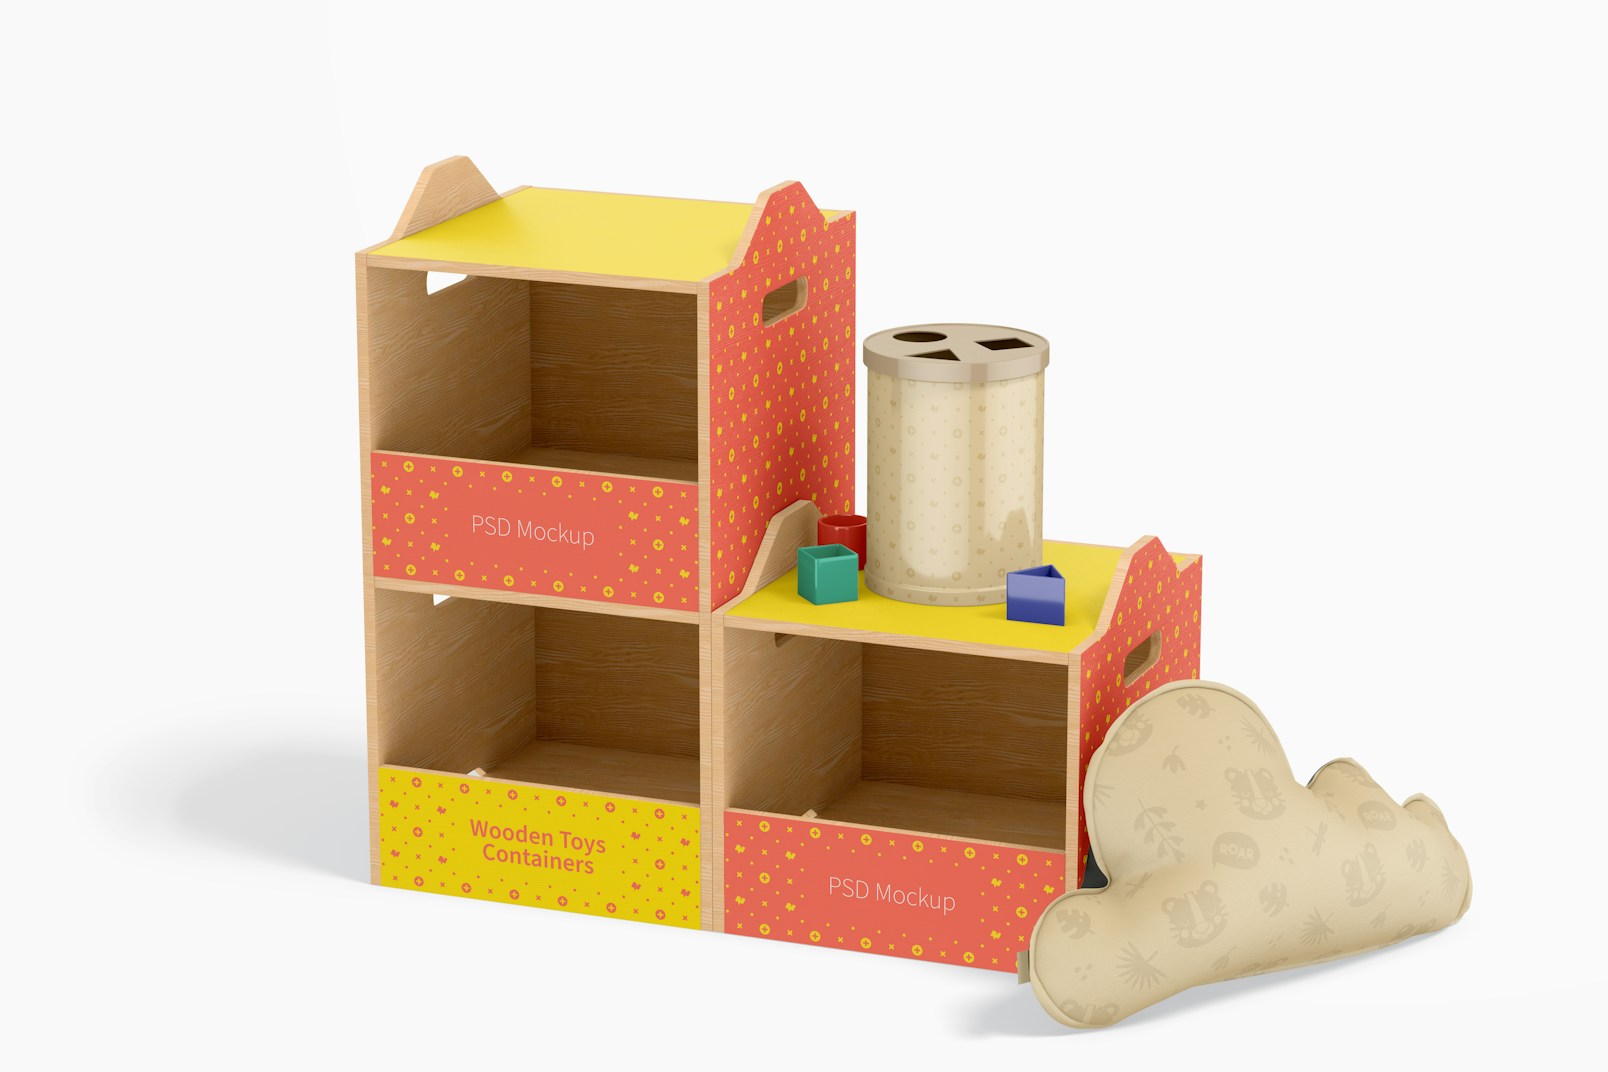 Wooden Toys Containers Mockup, Left View